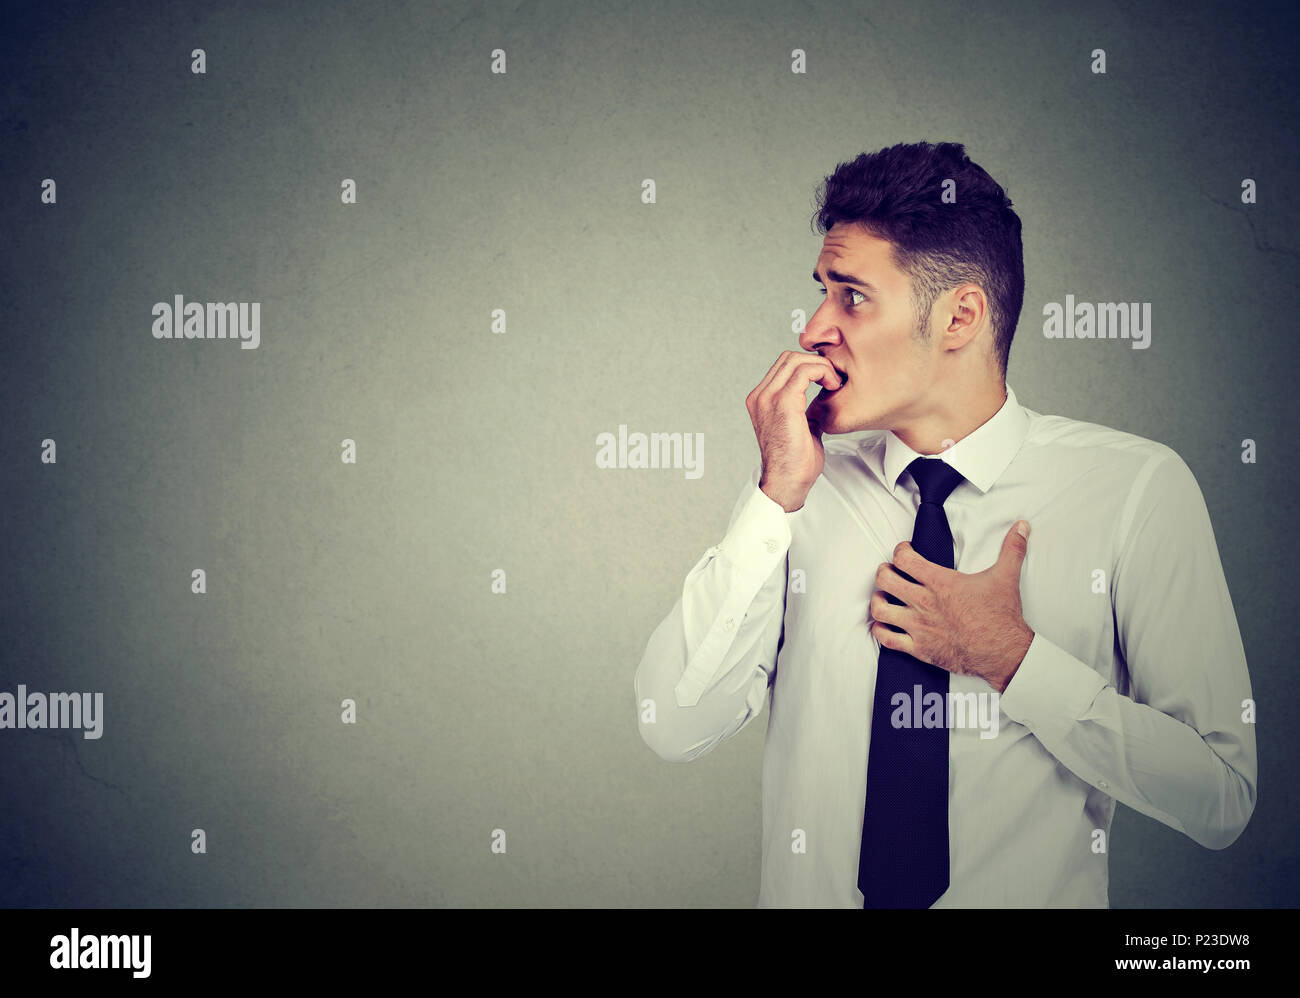 The Preoccupied anxious young business man Stock Photo